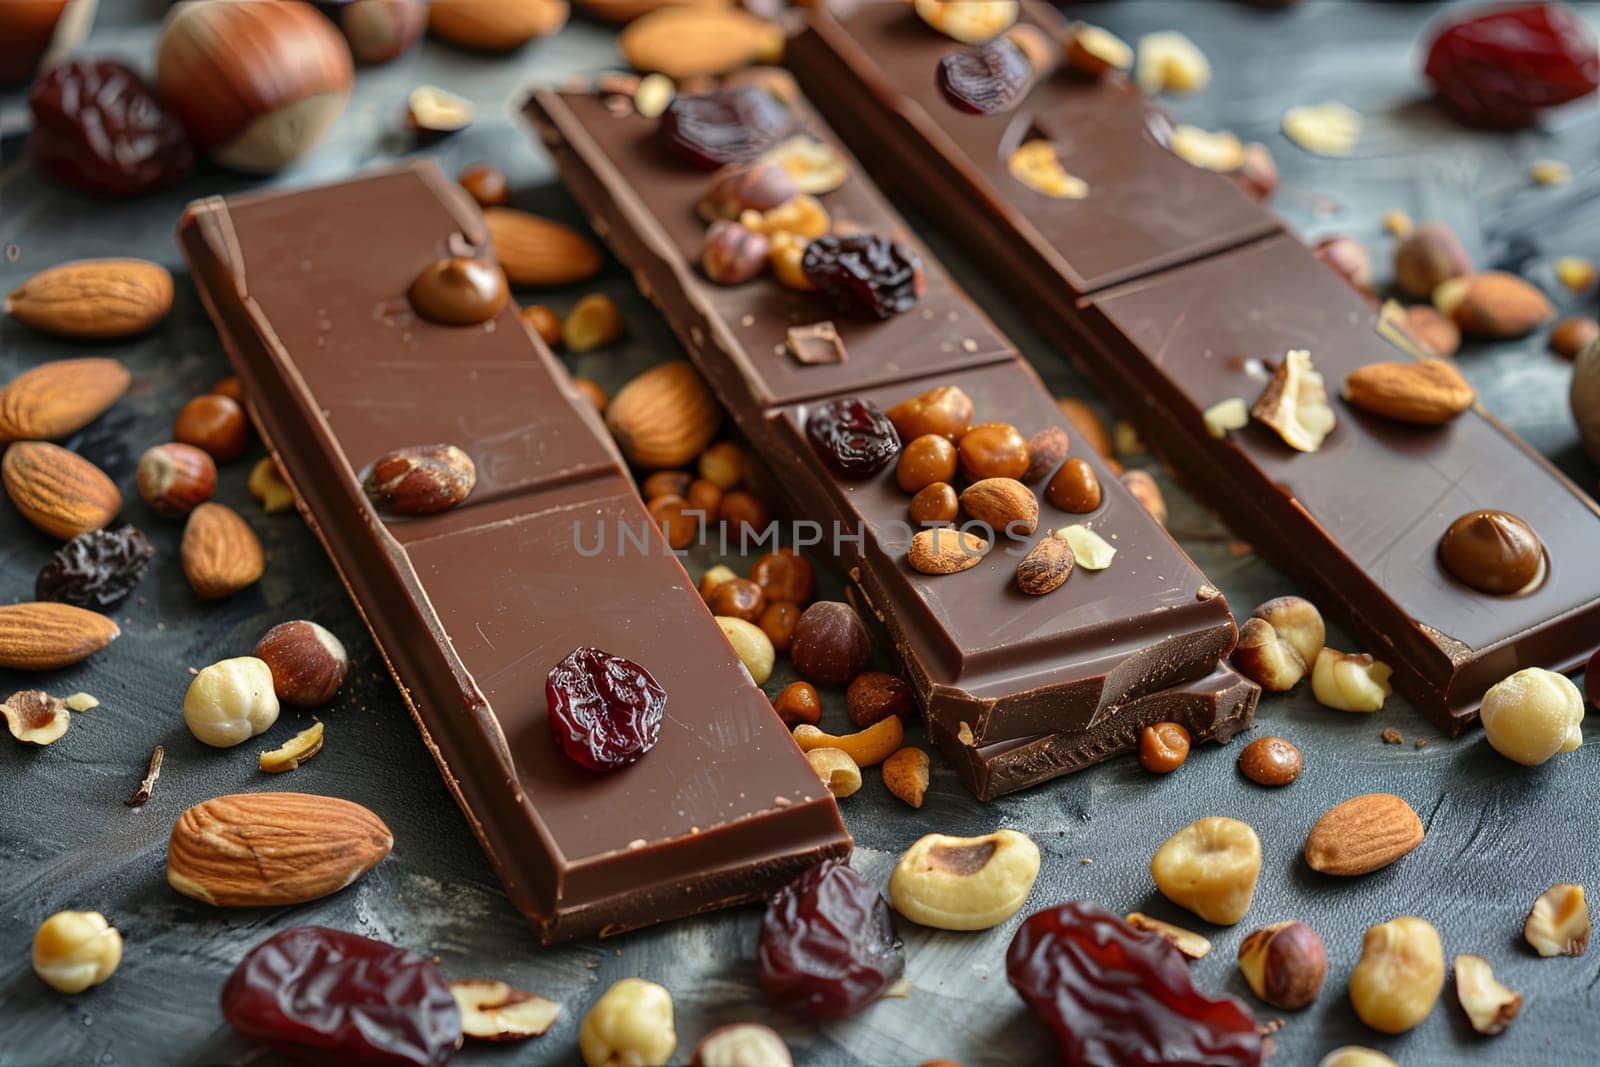 Two pieces of chocolate are topped with nuts and cranberries, creating a visually appealing and appetizing display on a table.